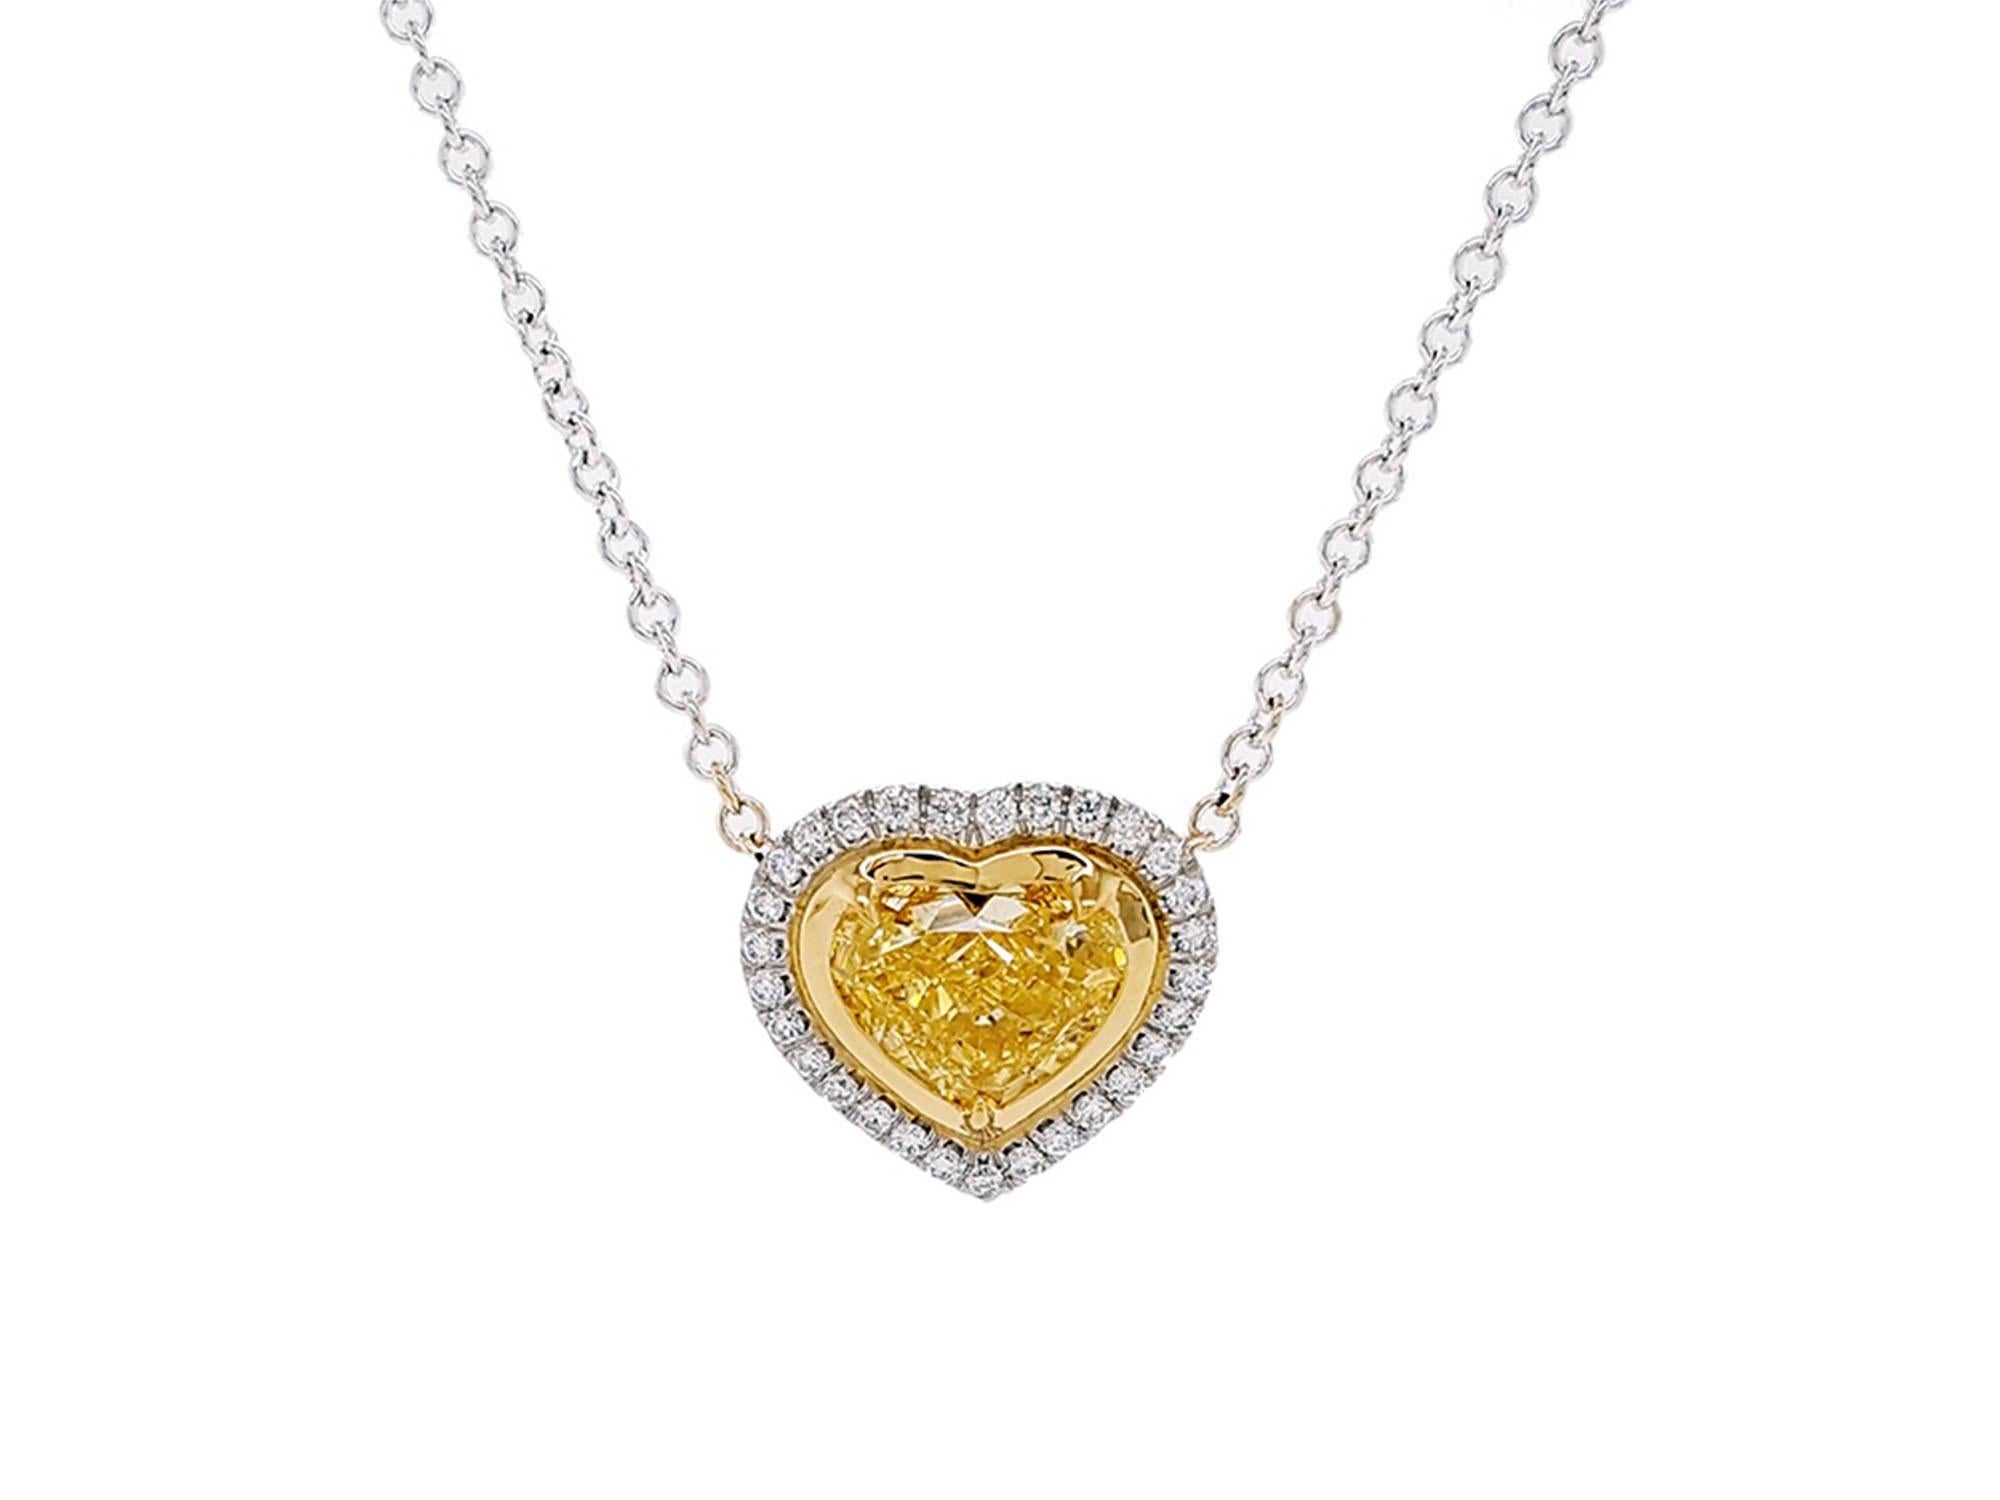 Introducing a breathtaking Halo Pendant Necklace boasting a 2.01 Carat Heart-shaped Fancy Intense Yellow Diamond at its core, GIA certified with VS2 clarity. This timeless design accentuates the elegance of the central stone, complemented by 29